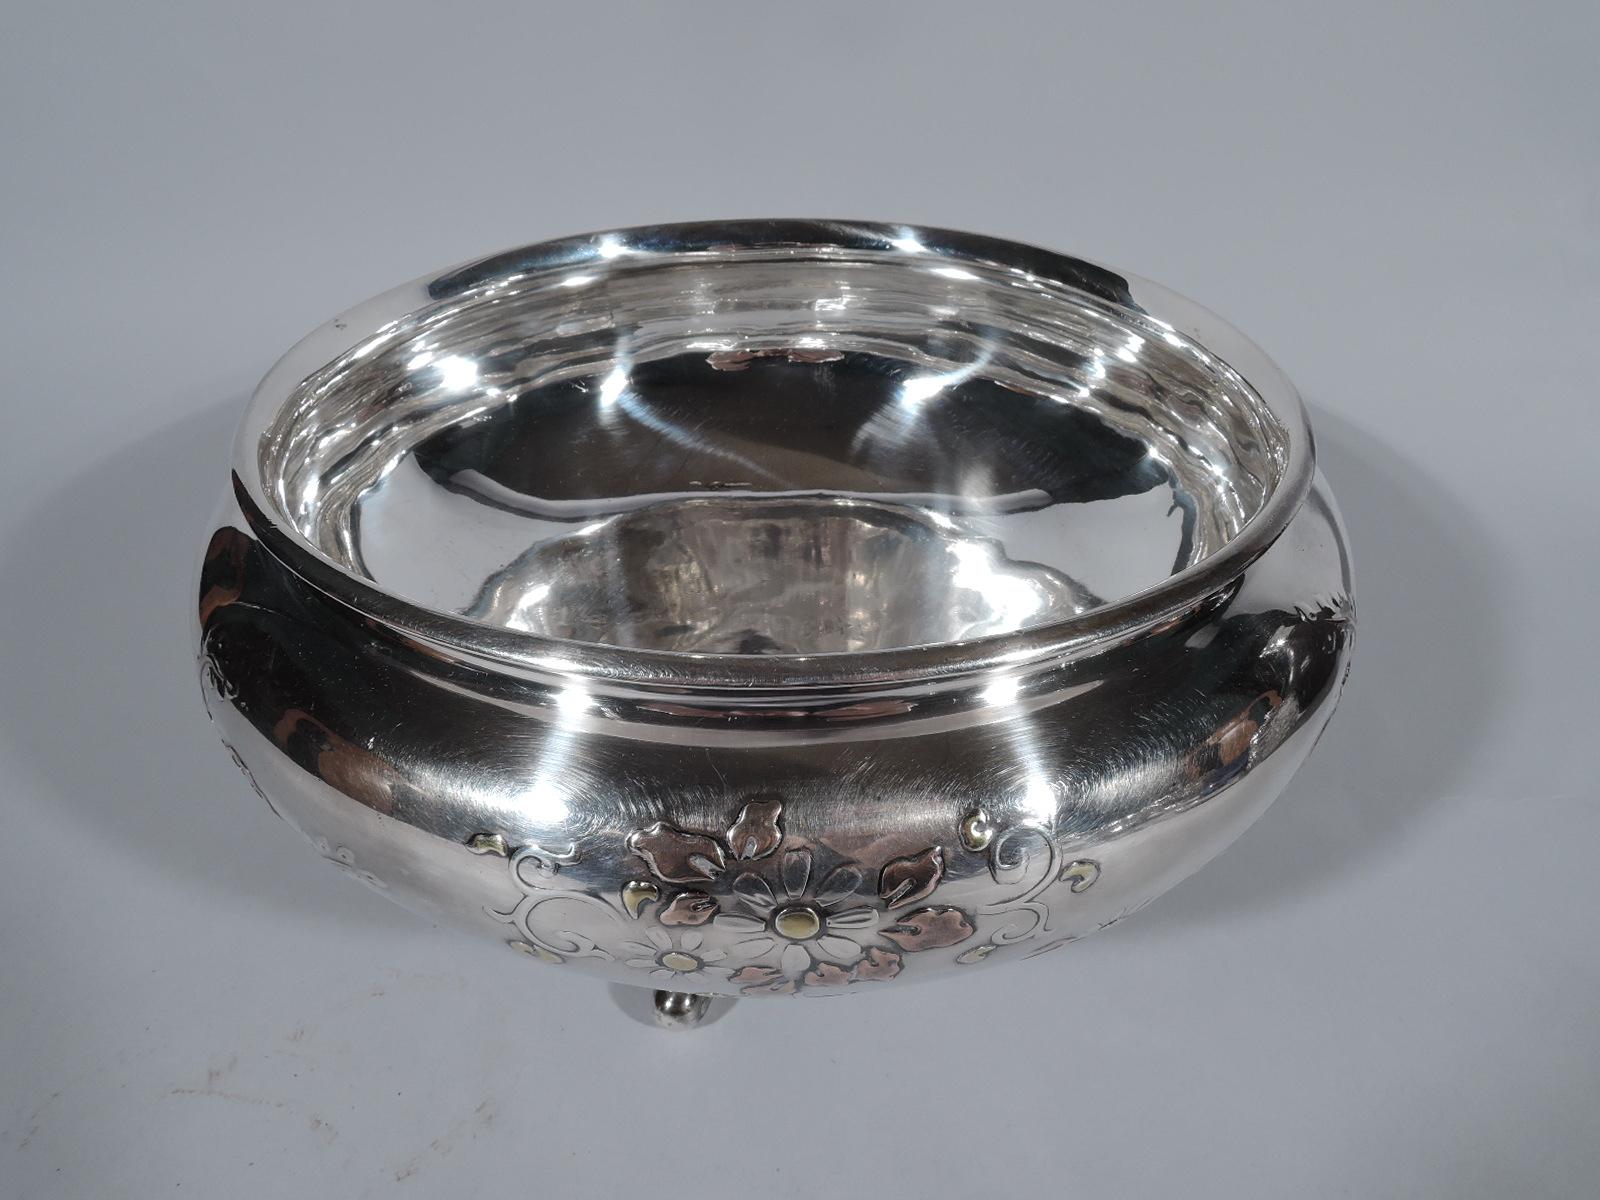 19th Century Antique Japanese Silver Bowl with Mixed Metal Flowers and Birds